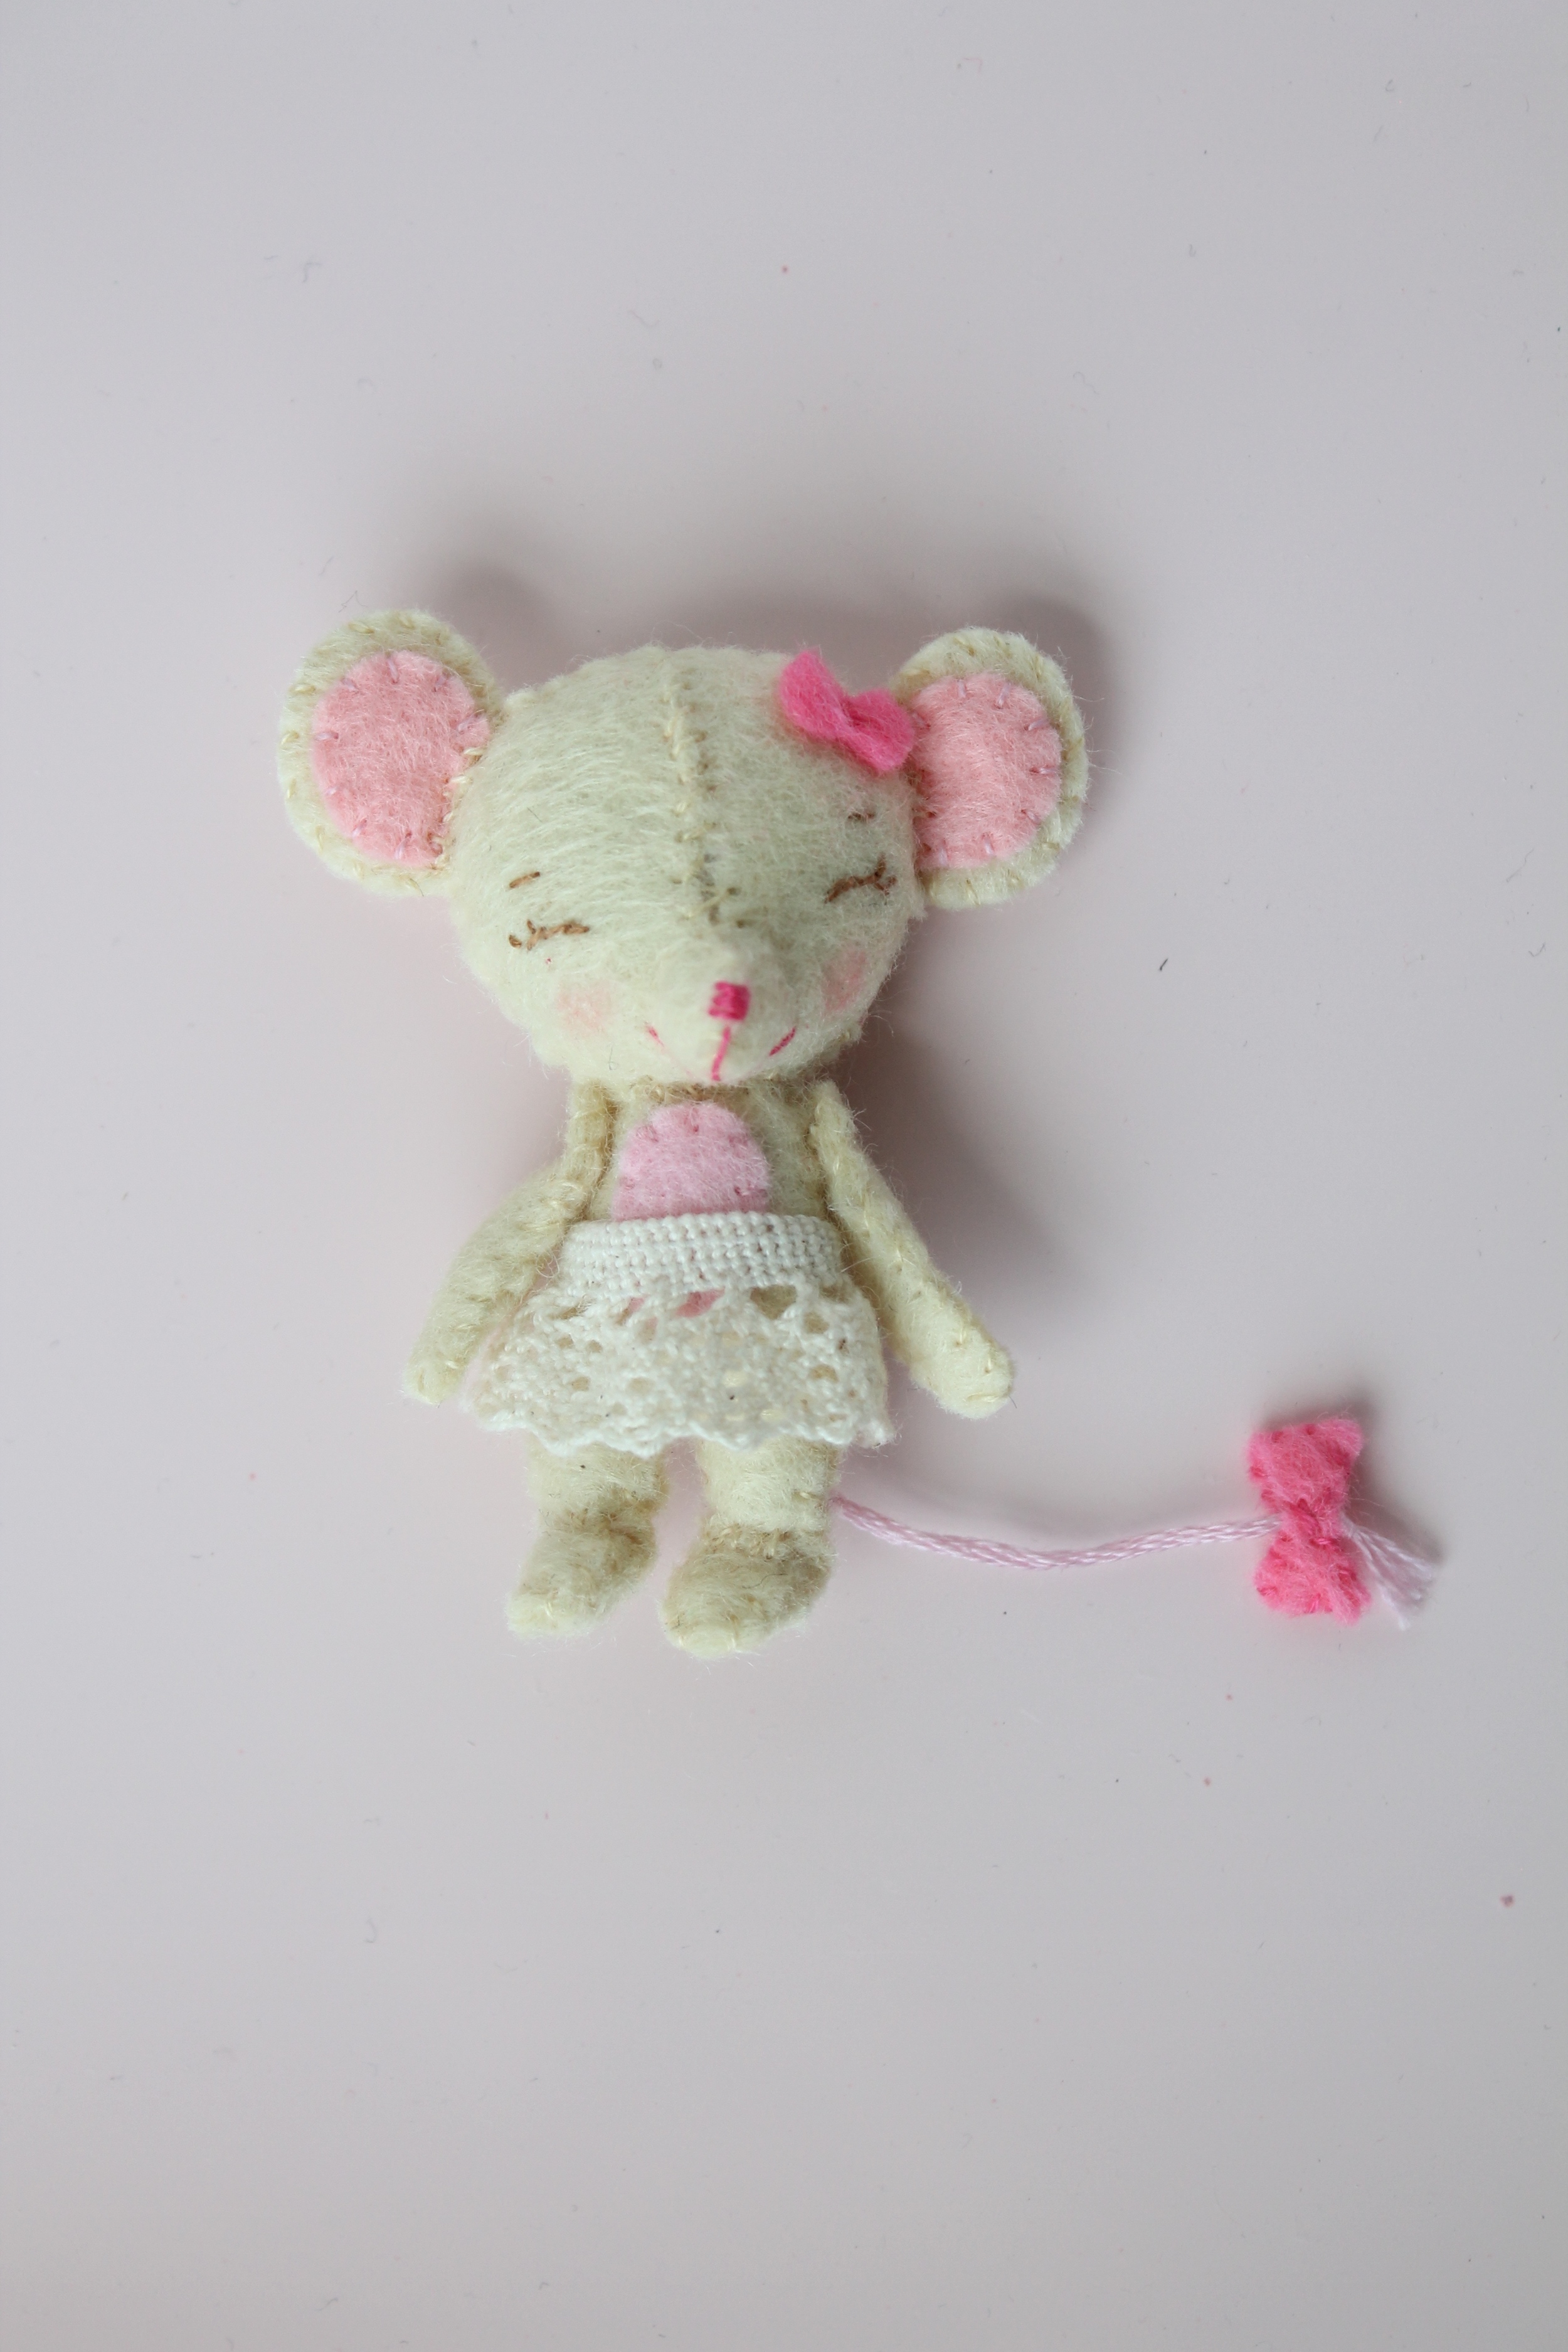 Adorable little hand sewn felt mouse. Pattern from Gingermelon ETSY shop.